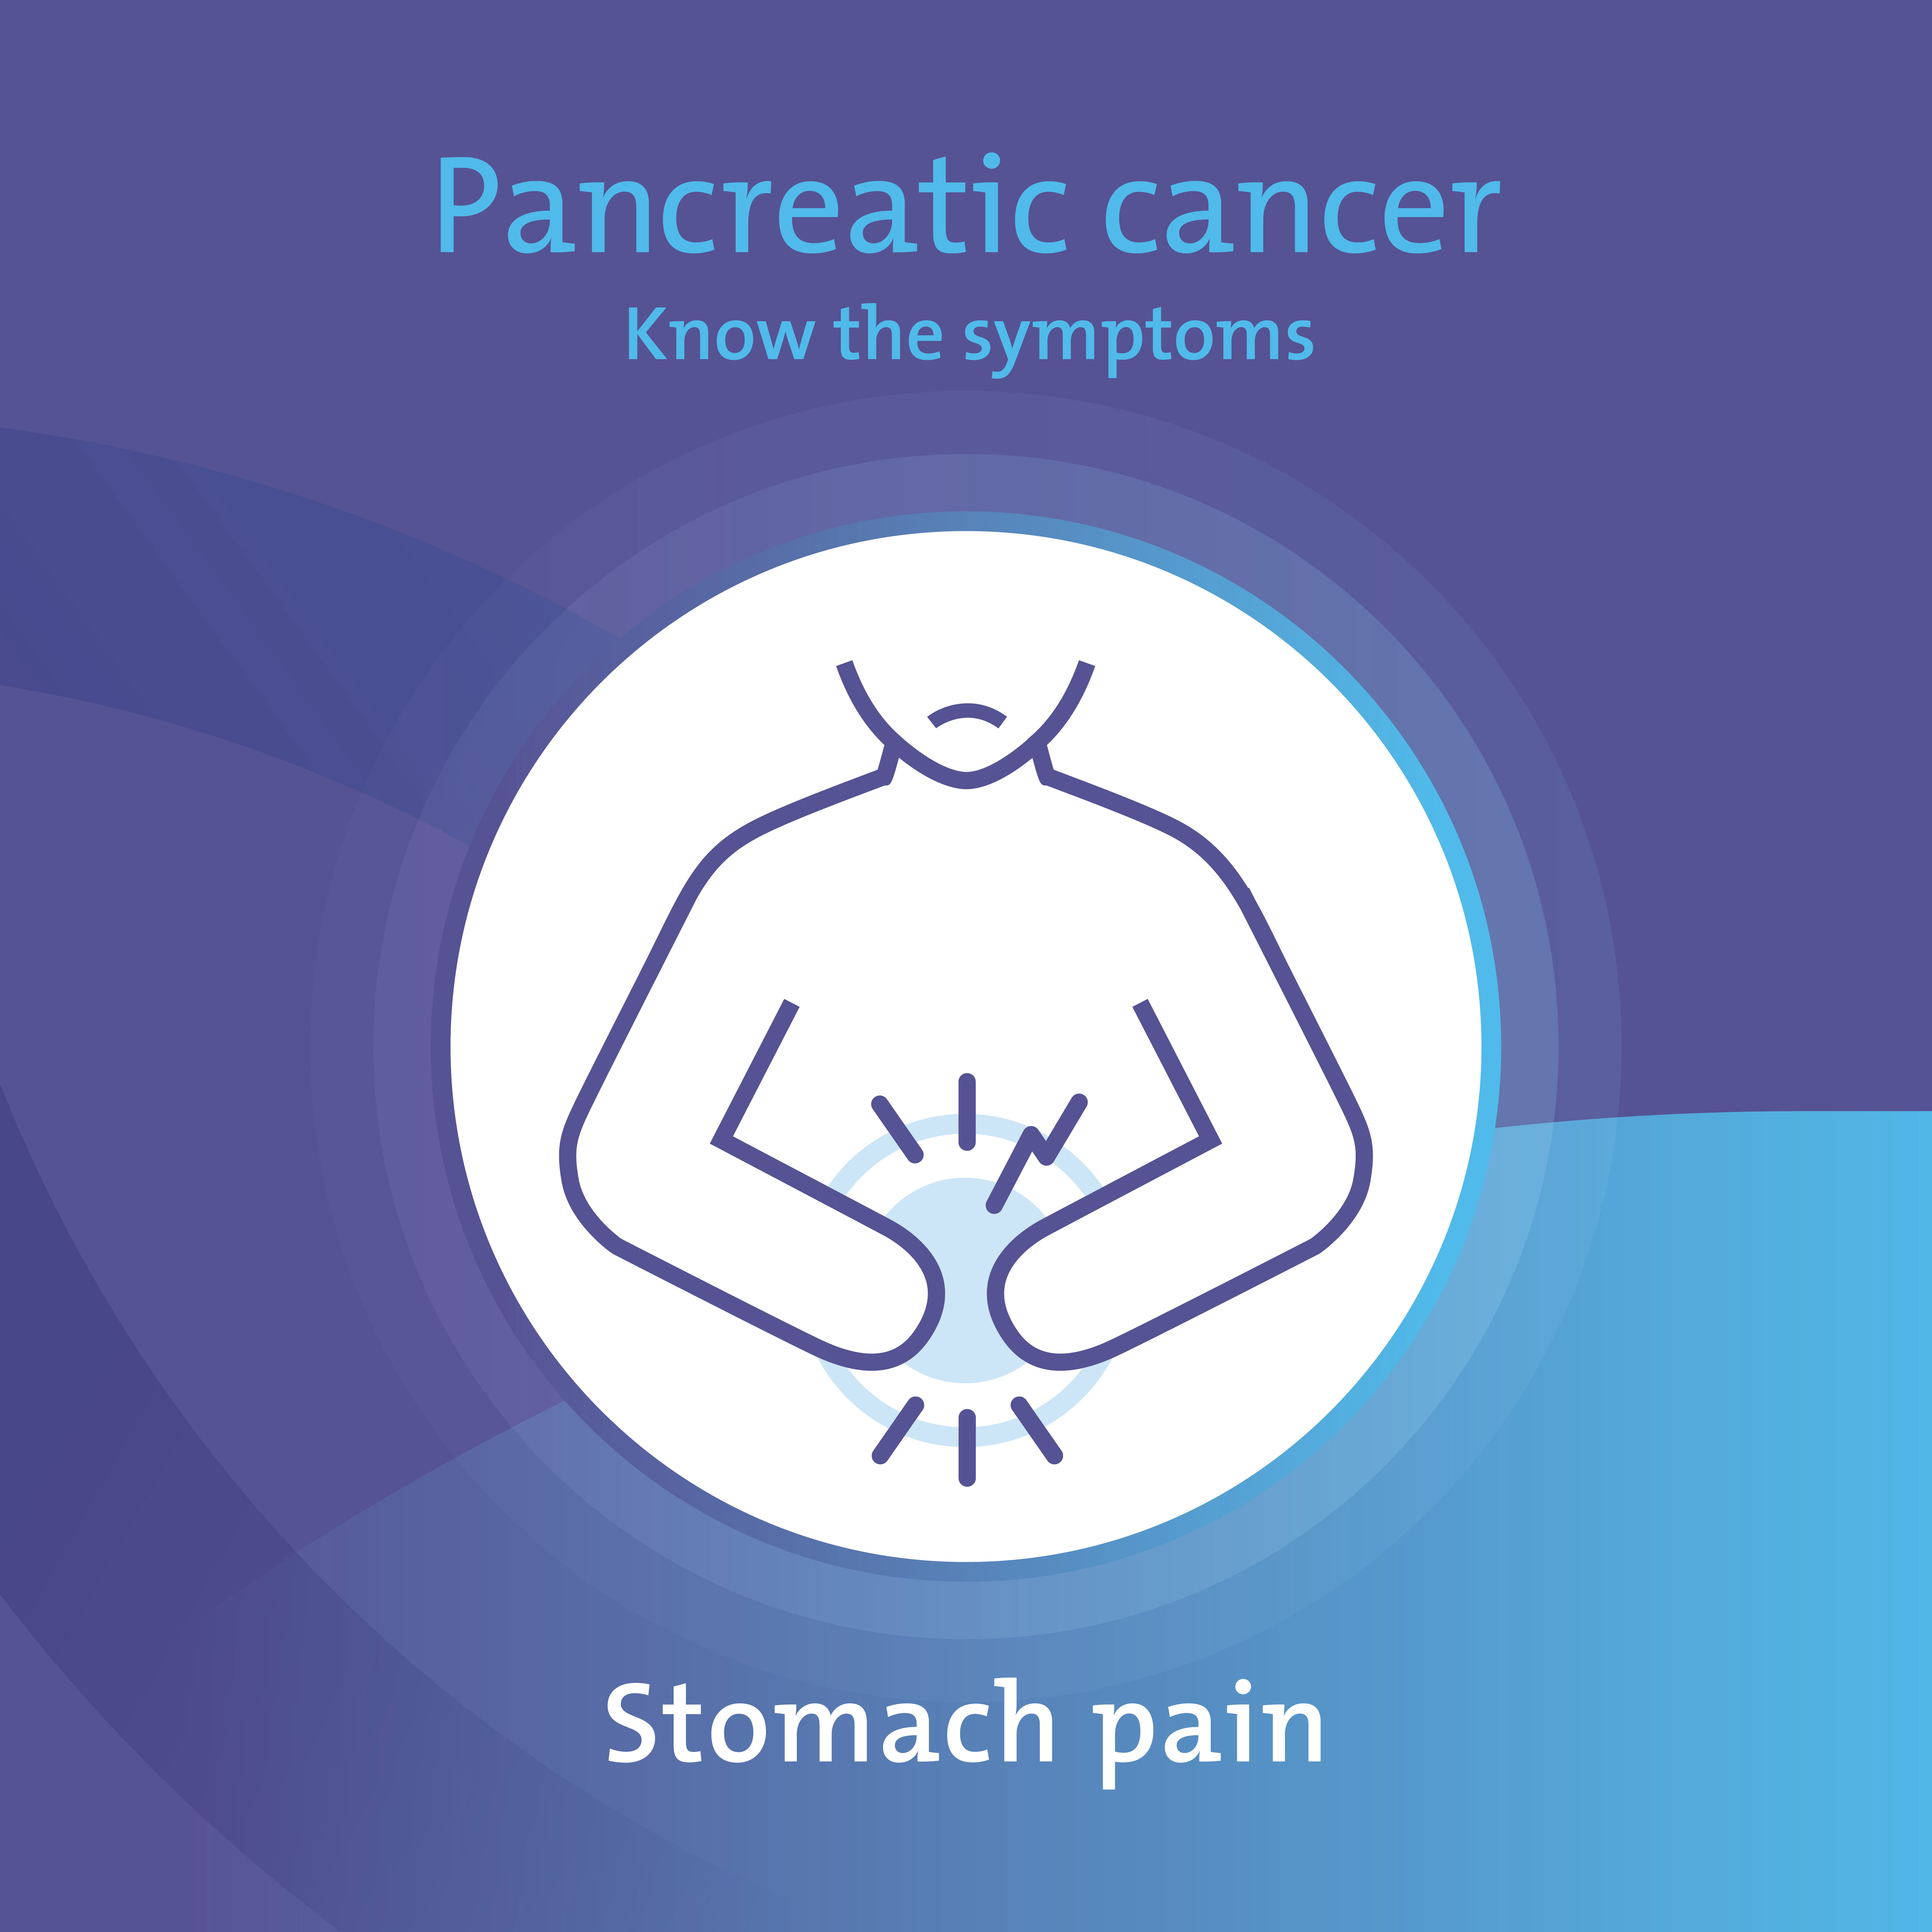 Pancreatic cancer - know the symptoms - stomach pain